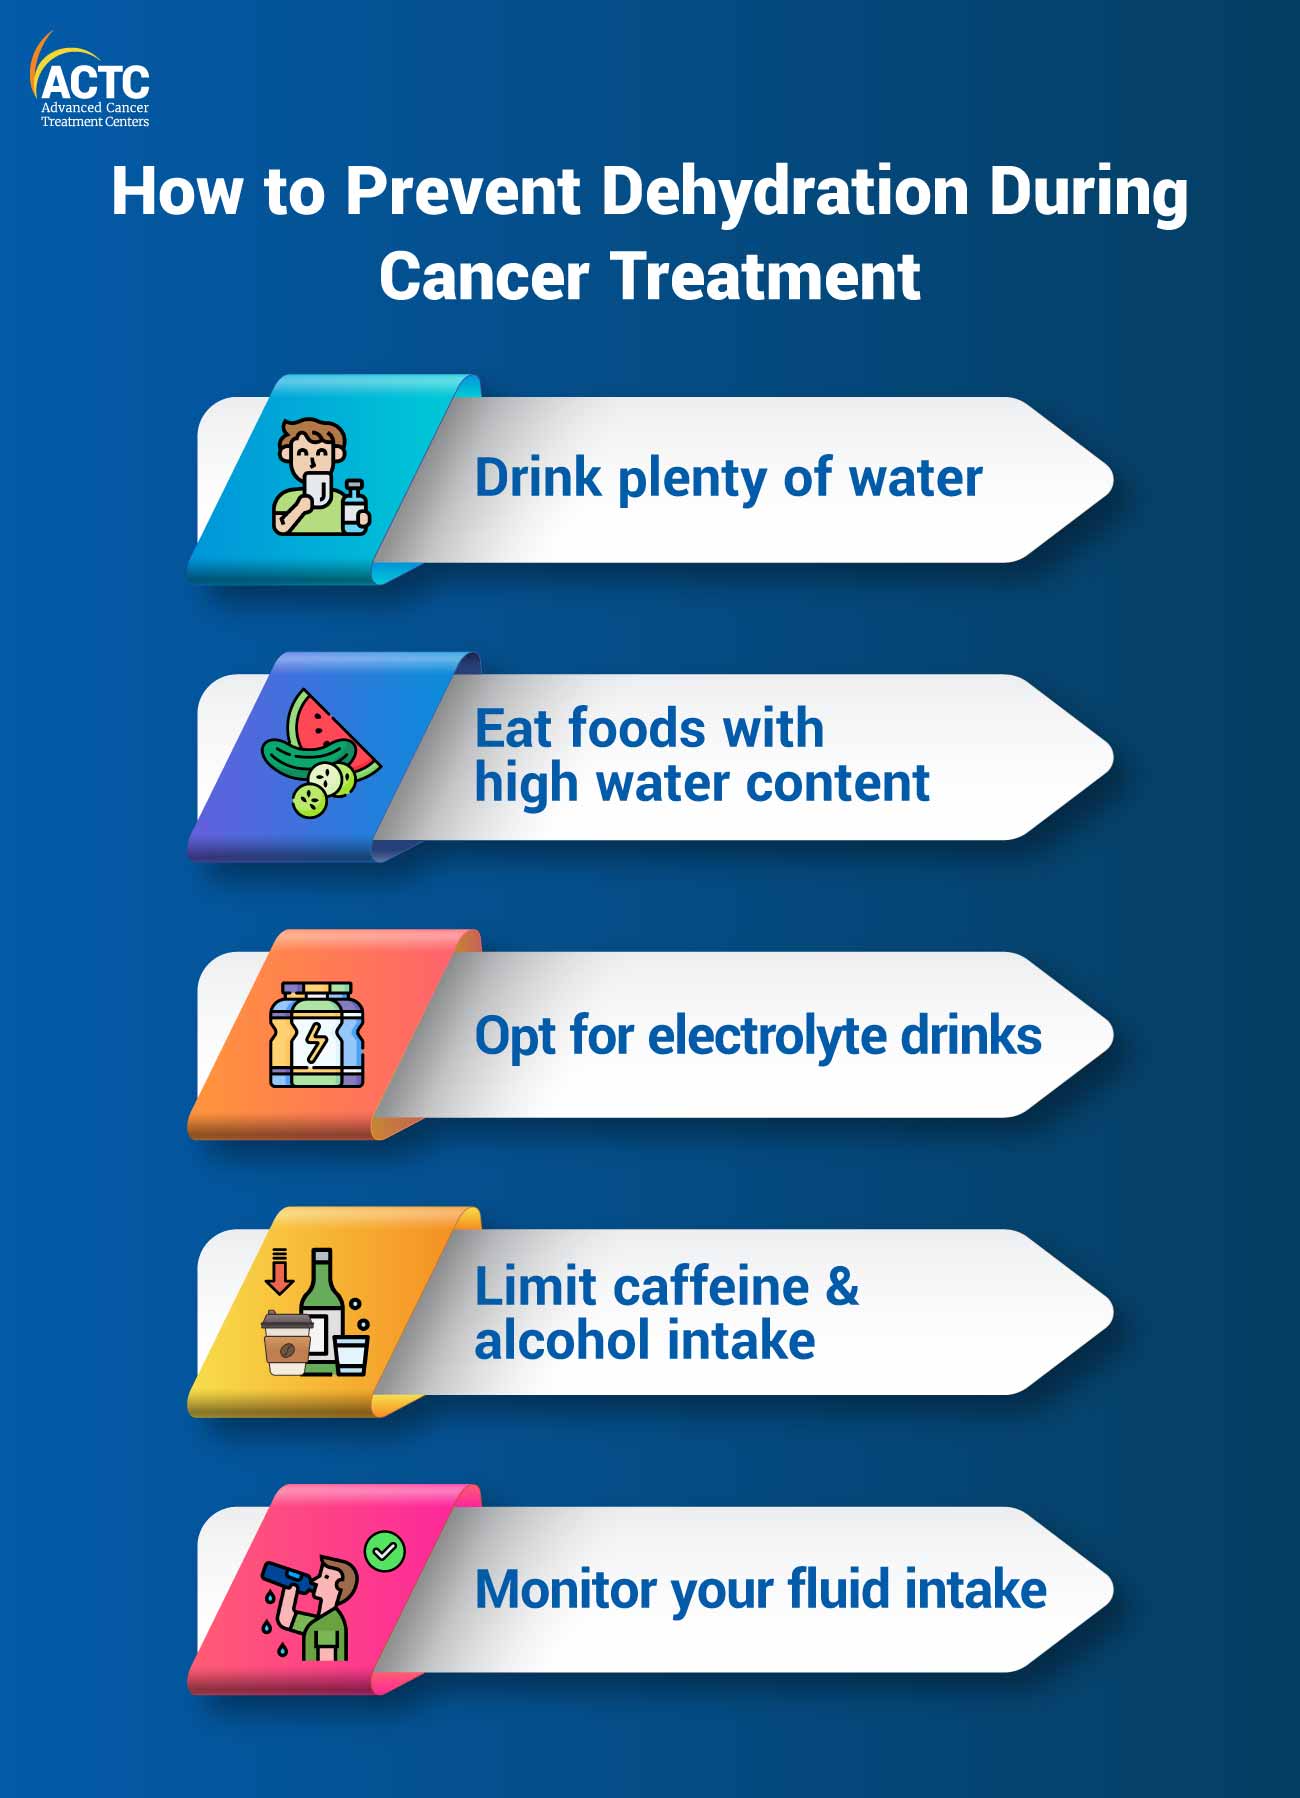 How to Ensure Hydration During Cancer Treatment